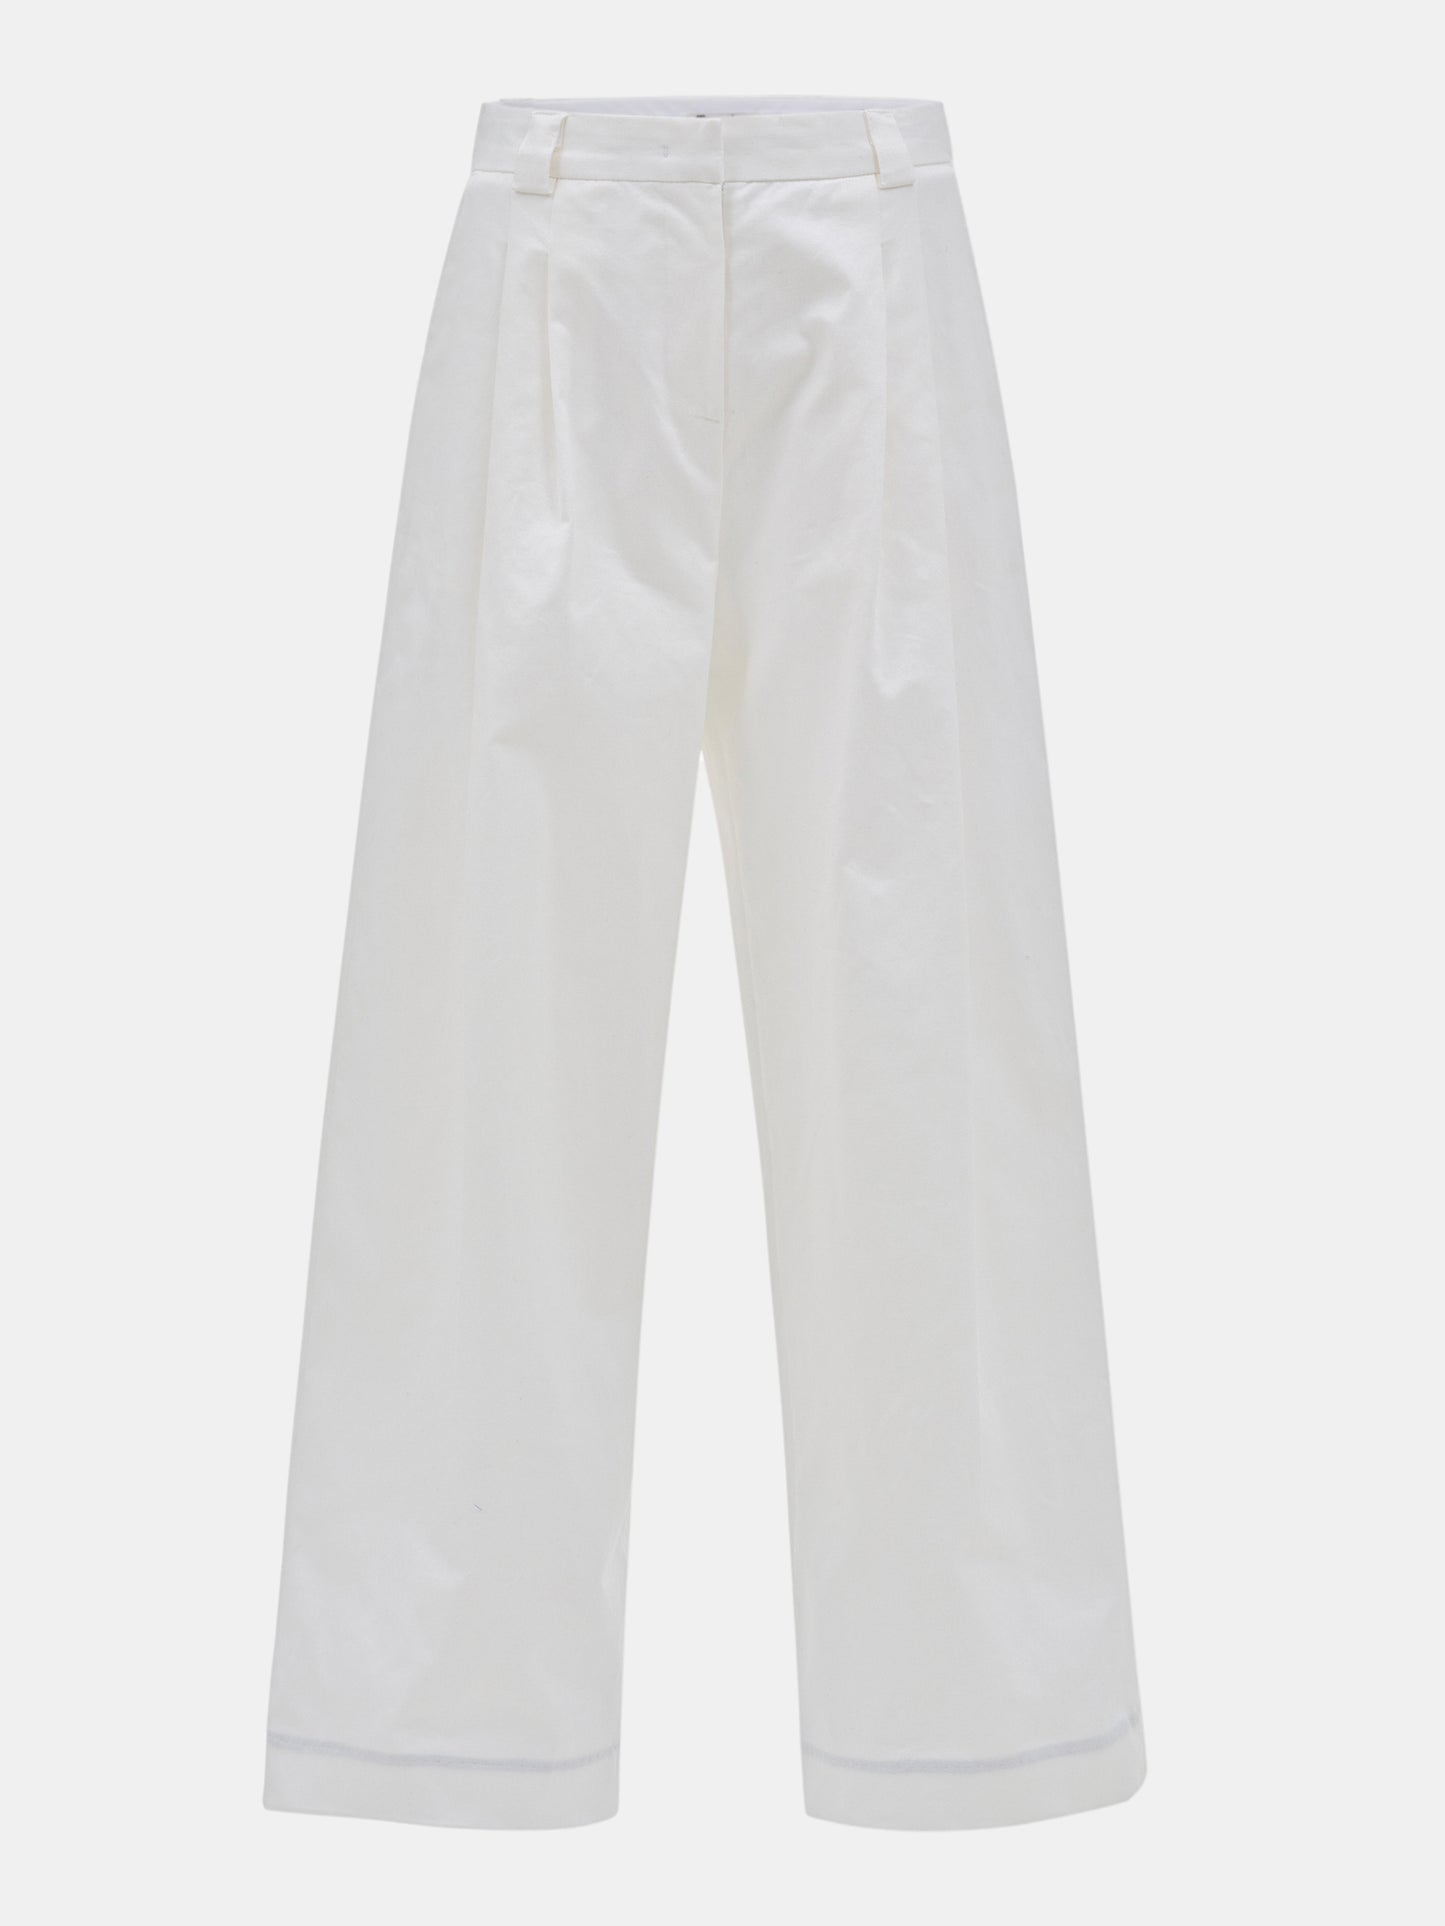 Pleated Cotton Twill Trousers, White